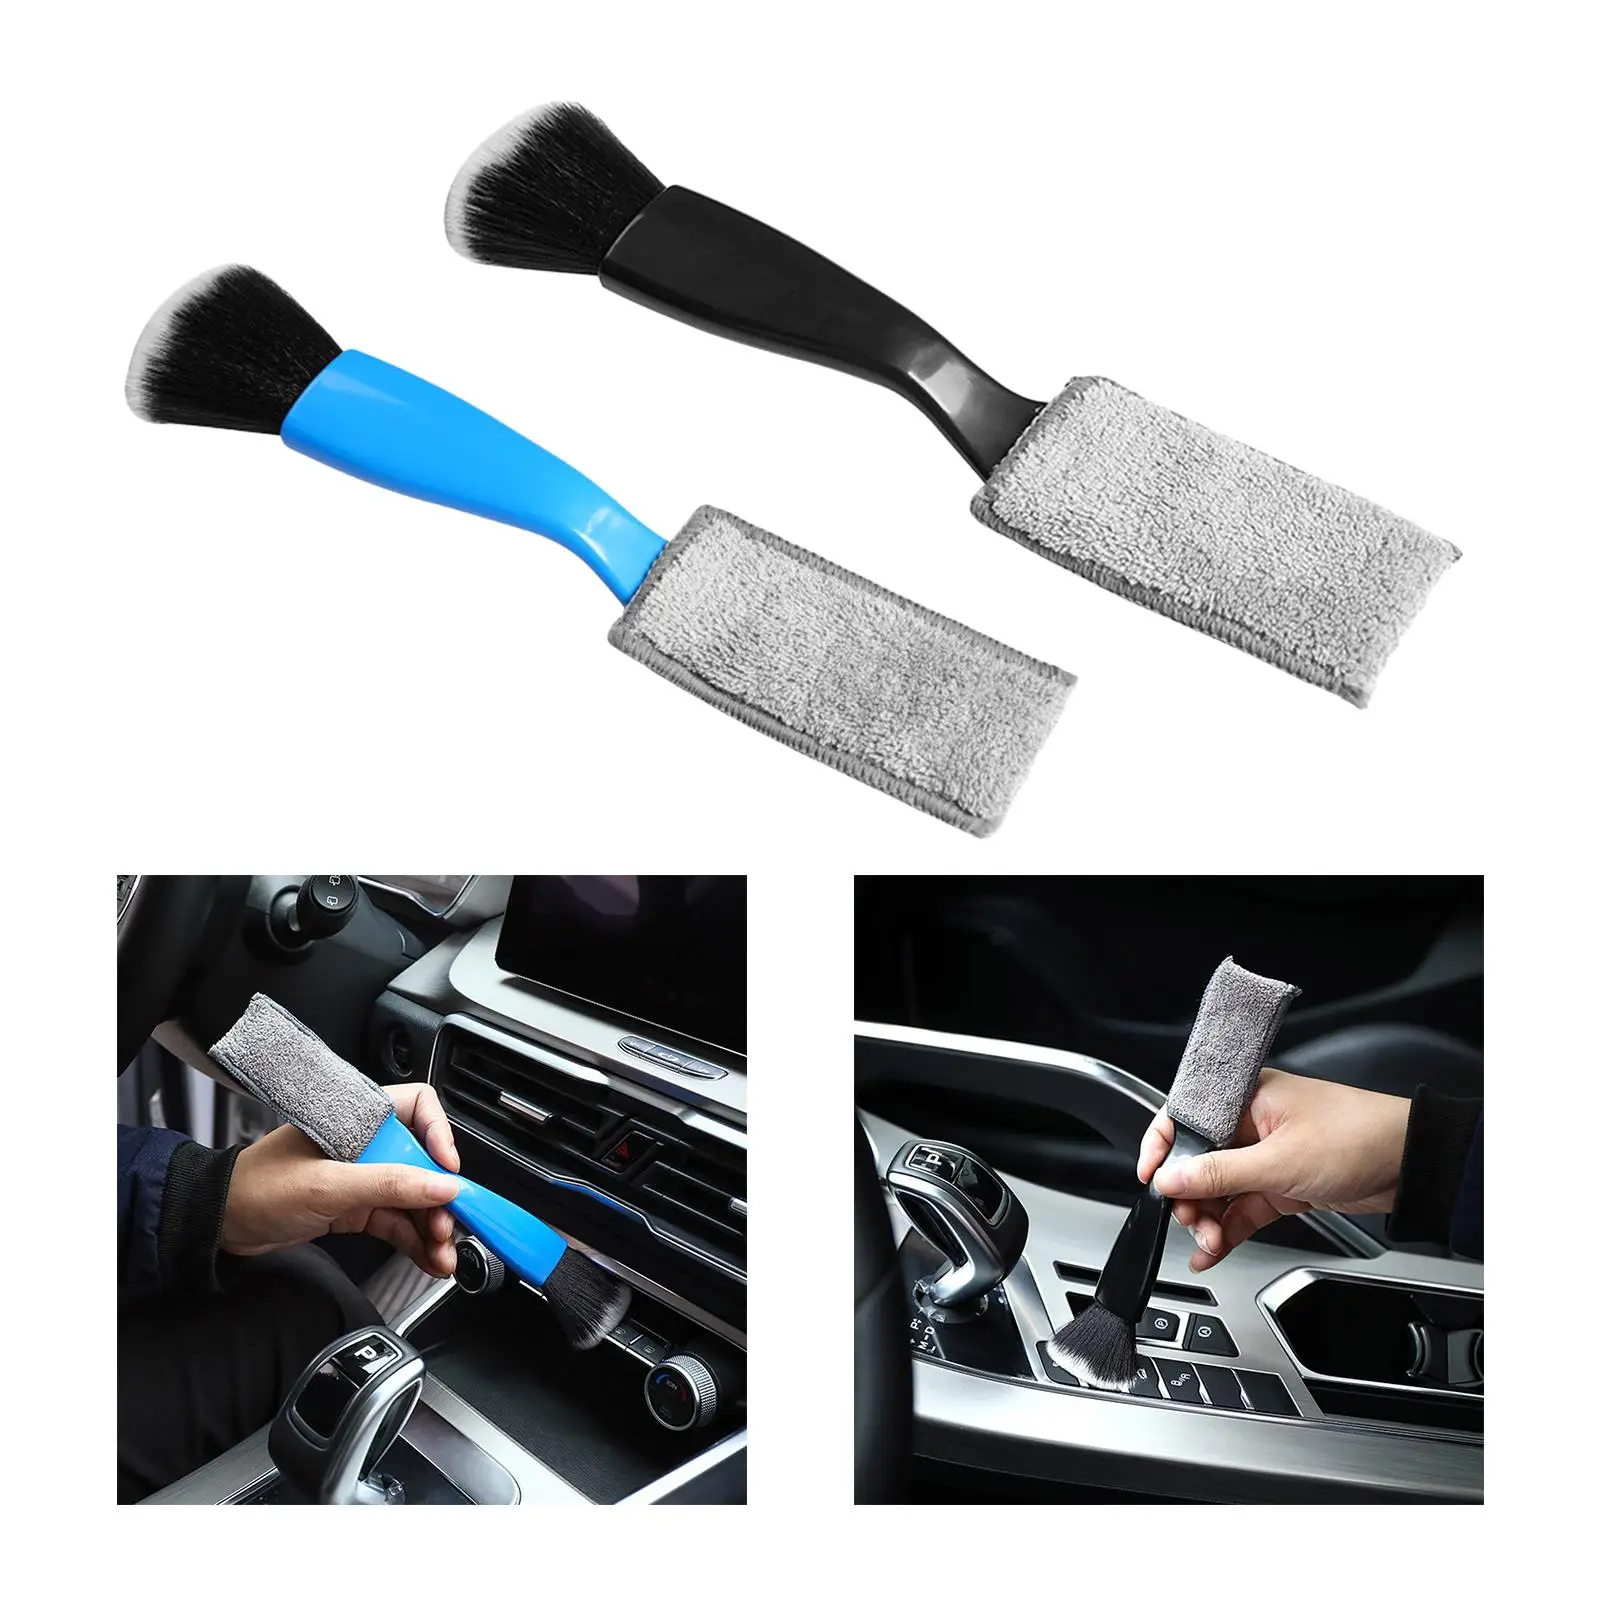 Soft Double Headed Car Detailing Brush Dashboard Cleaner and Brush Duster